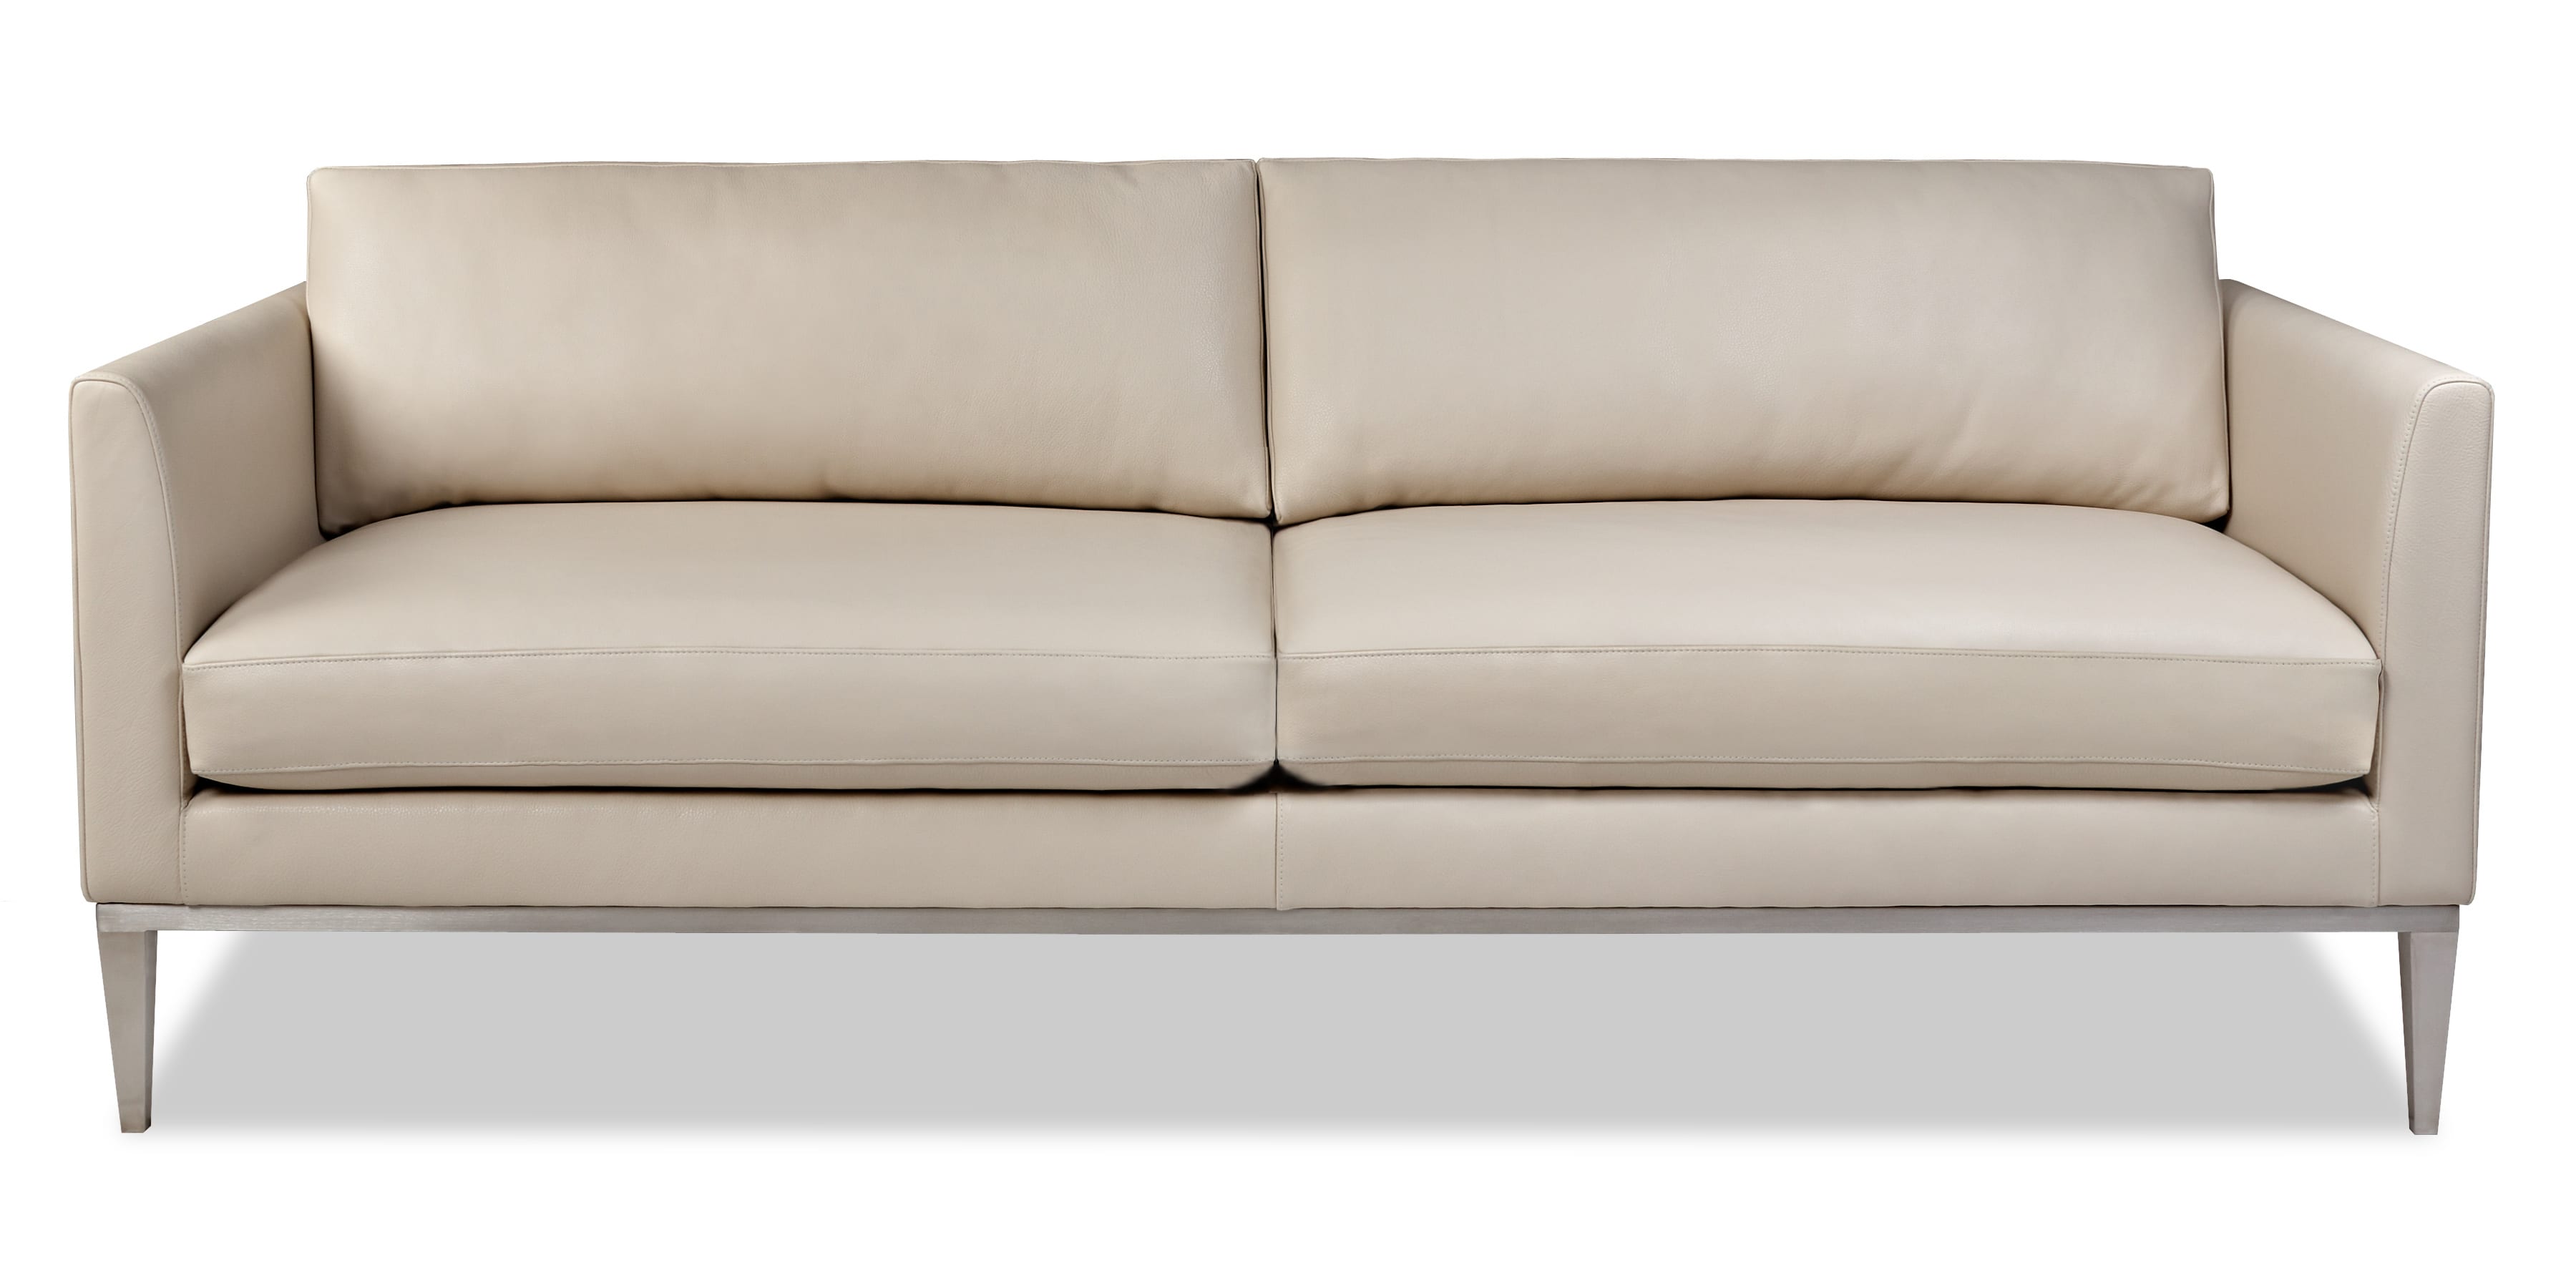 henley tufted leather sofa